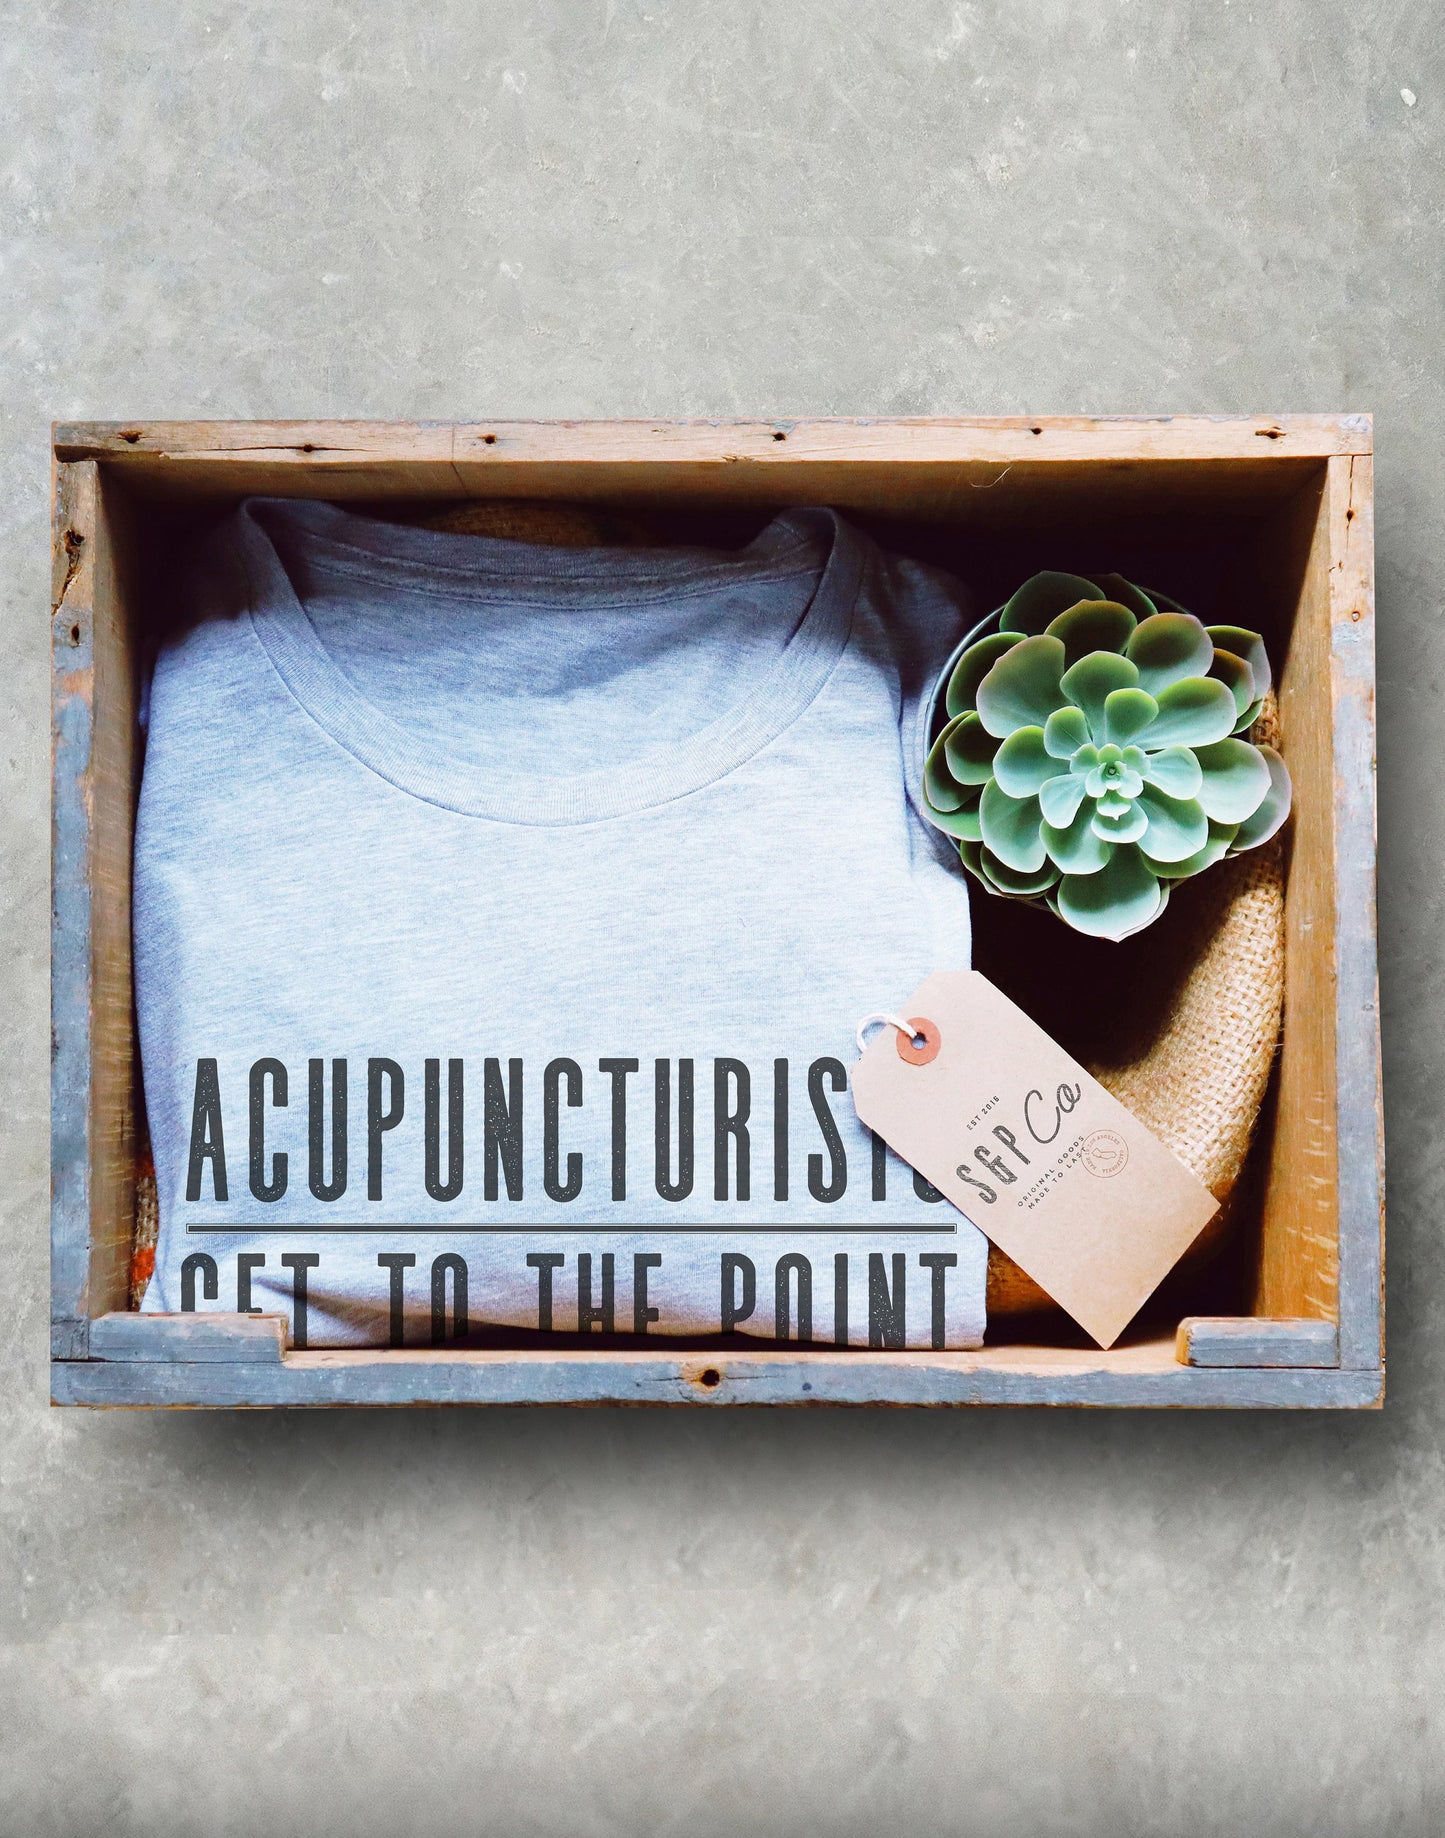 Acupuncturists Get To The Point Unisex Shirt